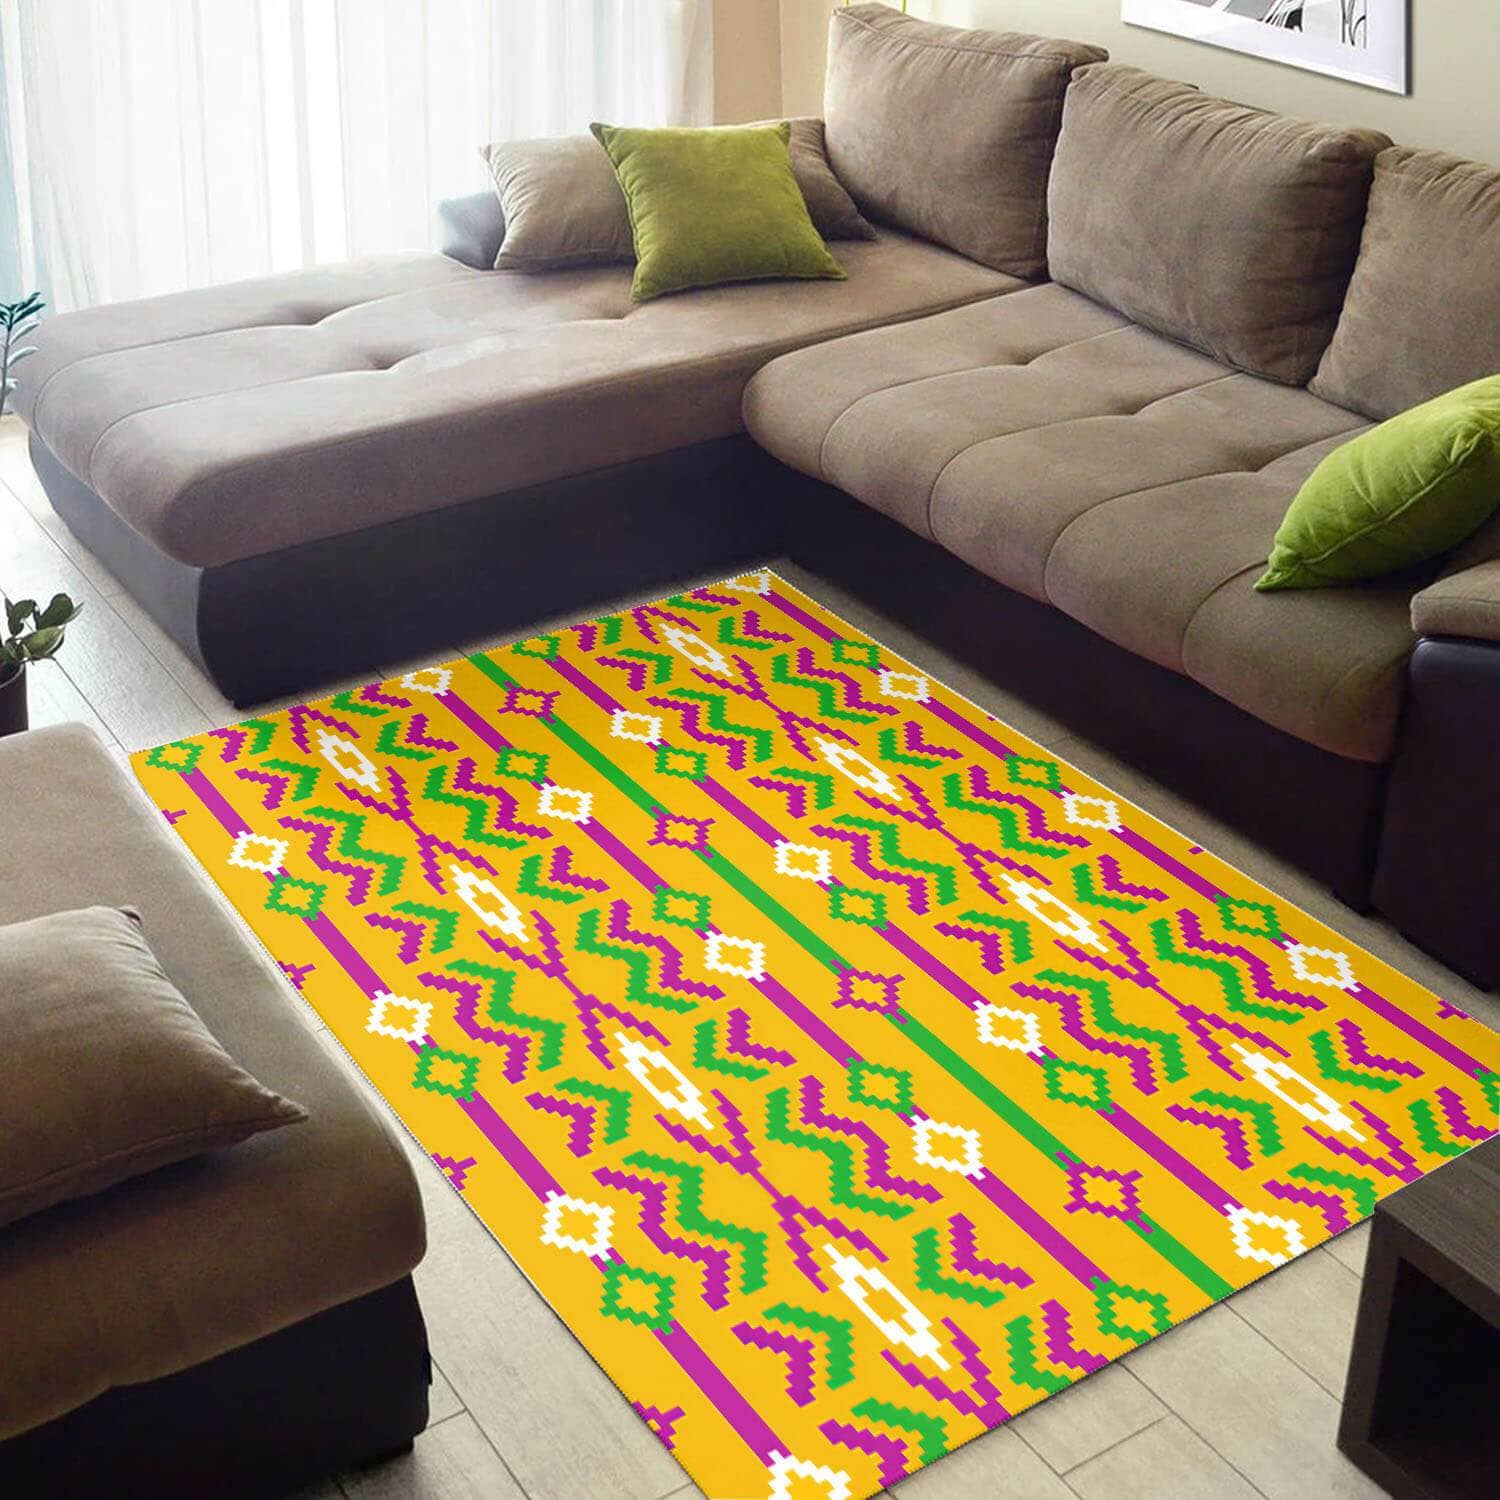 Nice African Beautiful Natural Hair Seamless Pattern Themed Carpet Inspired Living Room Rug